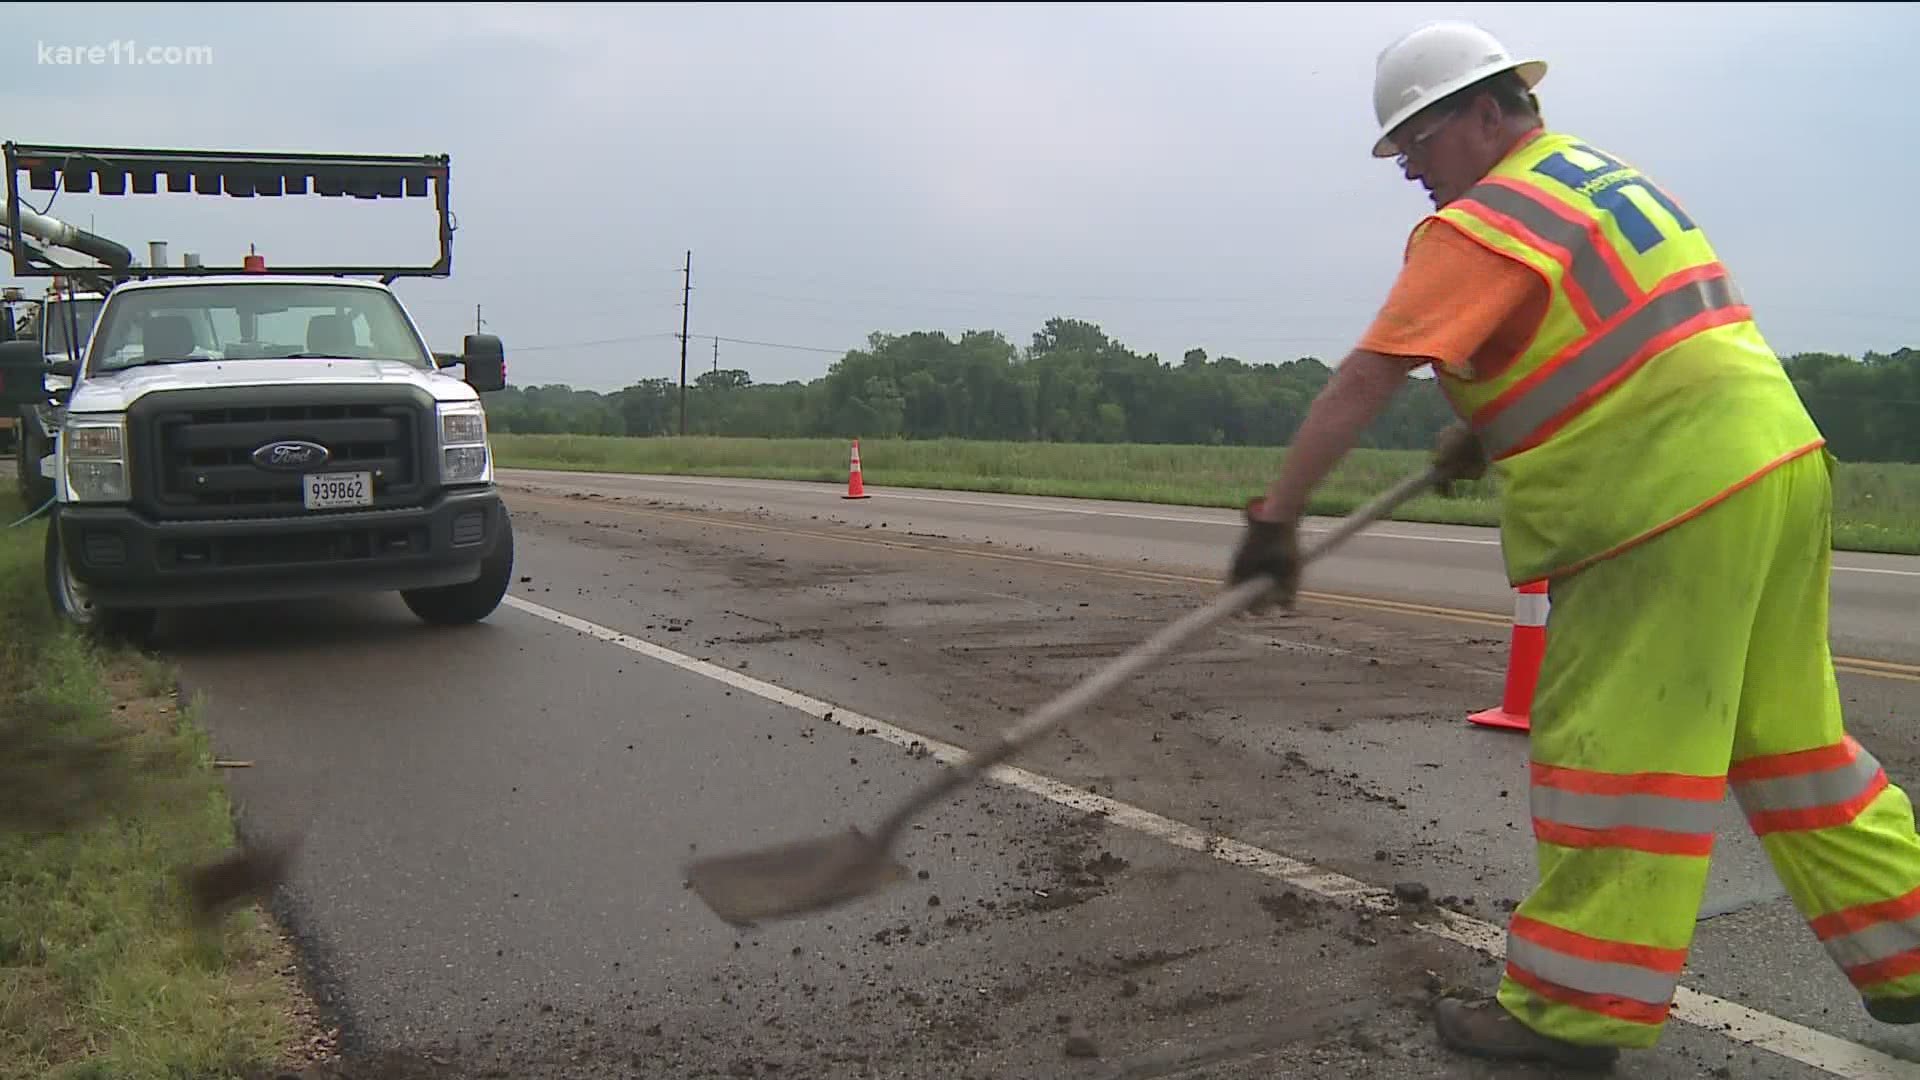 From taking more breaks, to drinking more water, road crews are doing everything they can to stay safe in this heat.